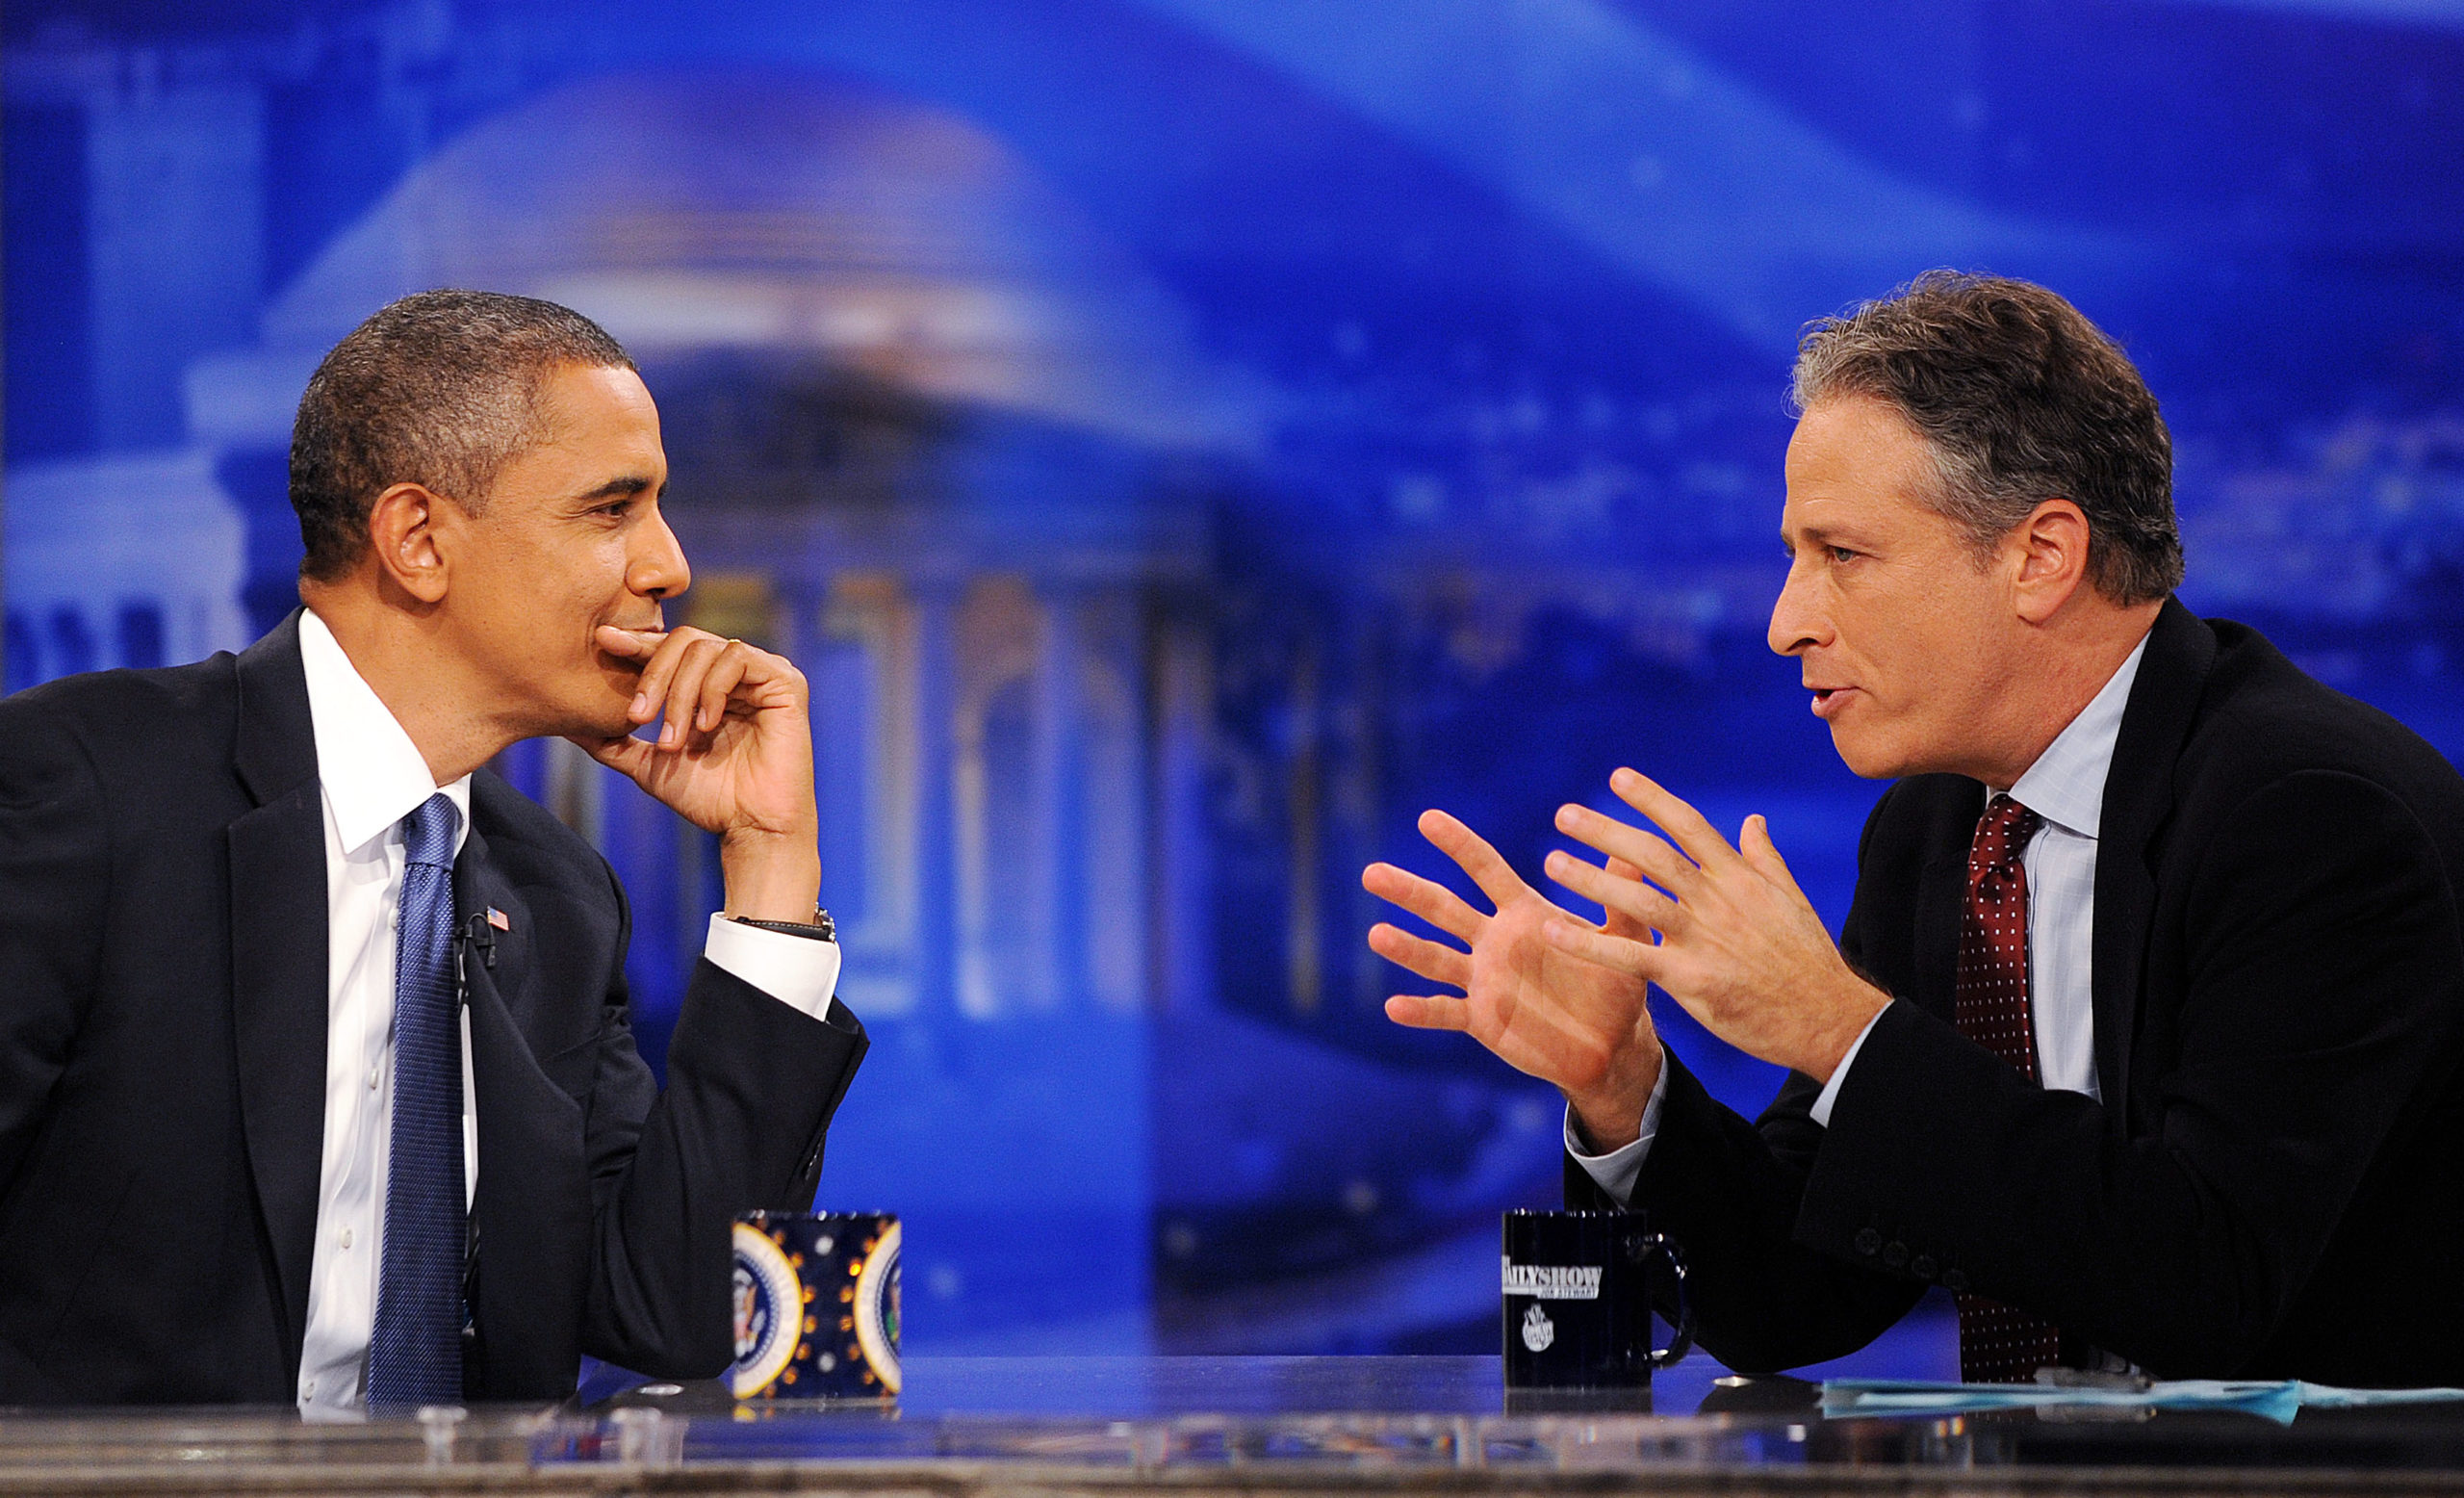 Jon Oliver and Barack Obama on The Daily Show